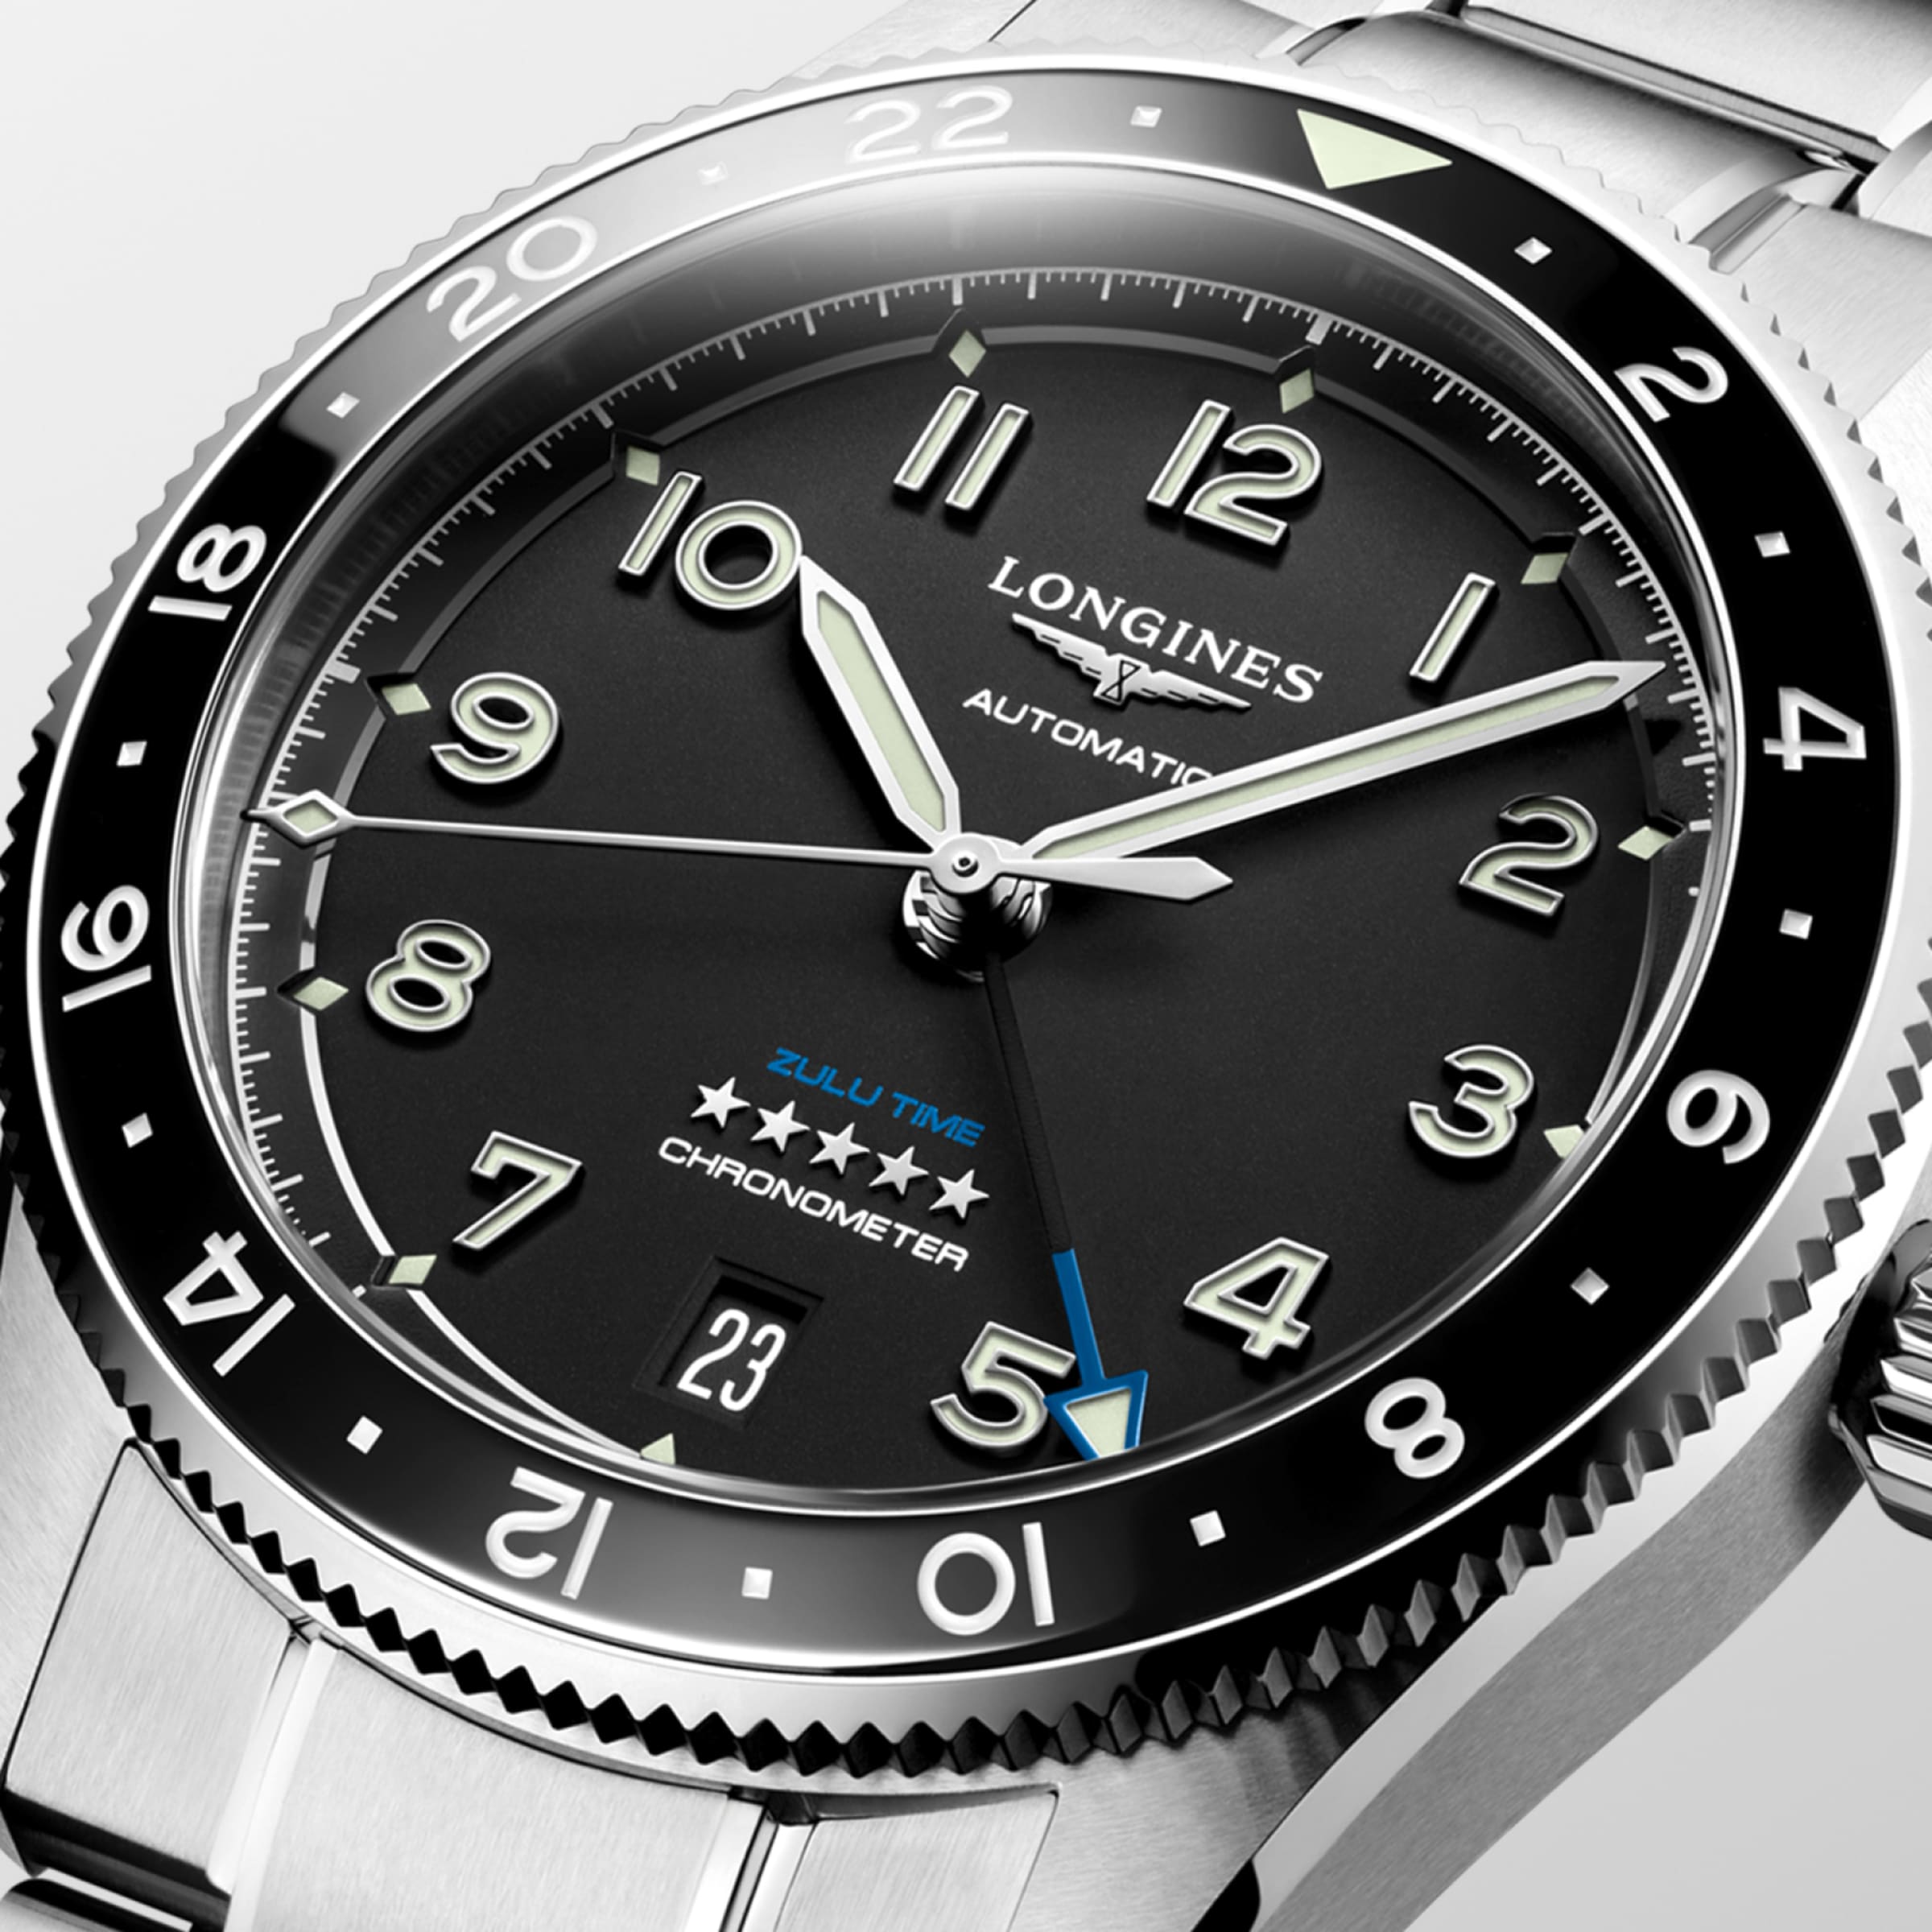 Longines SPIRIT Automatic Stainless steel and ceramic bezel Watch - L3.802.4.53.6